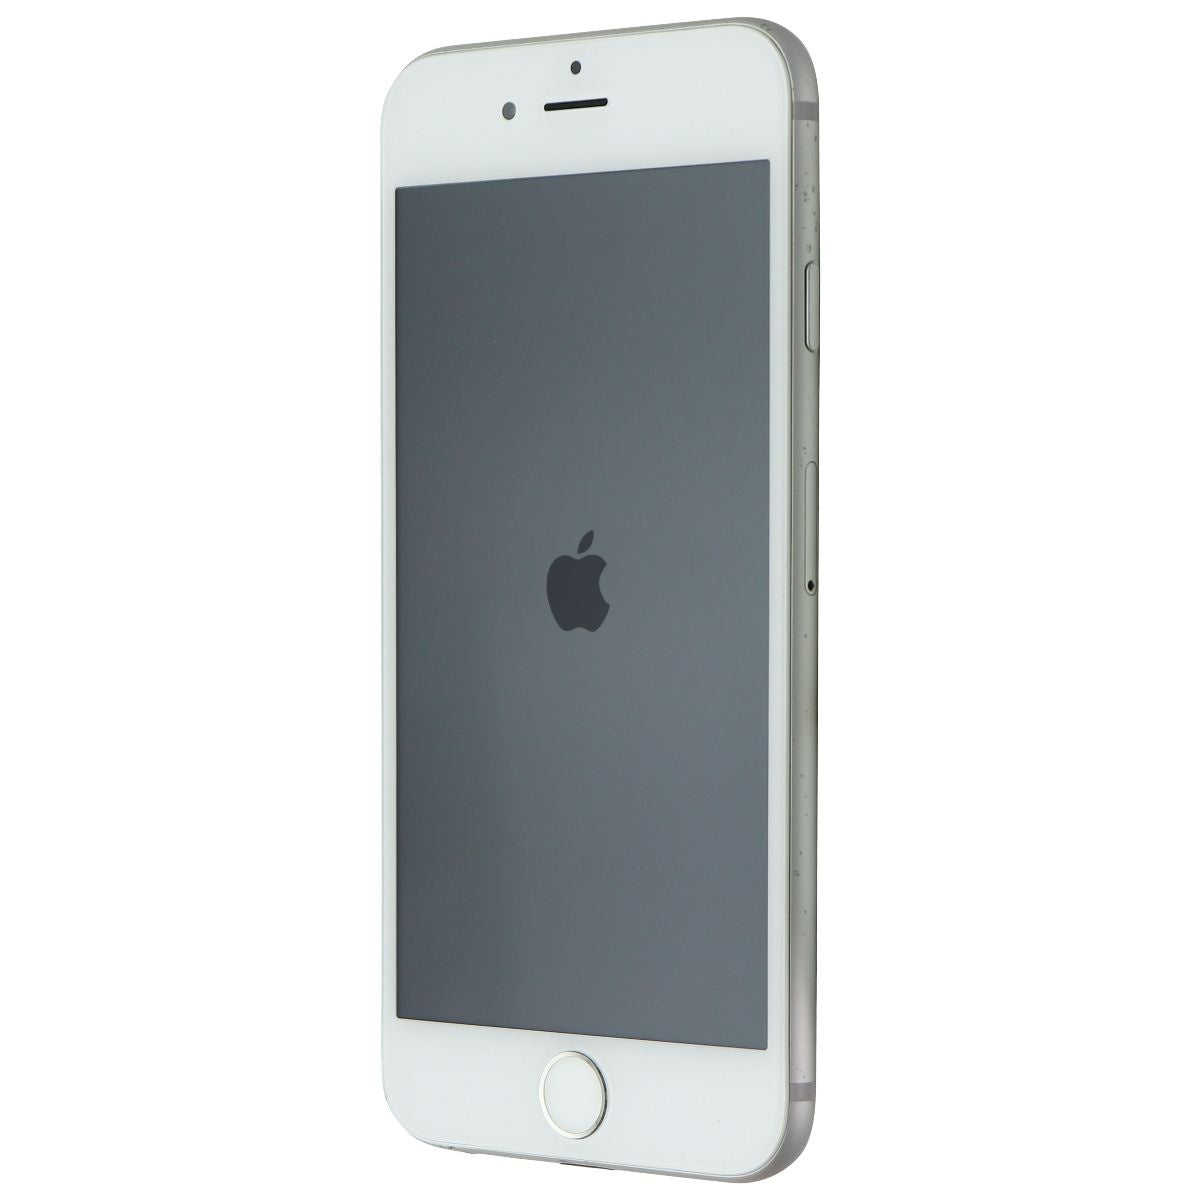 Apple iPhone 6 (4.7-inch) Smartphone (A1549) AT&T Only - 16GB / Silver Cell Phones & Smartphones Apple    - Simple Cell Bulk Wholesale Pricing - USA Seller